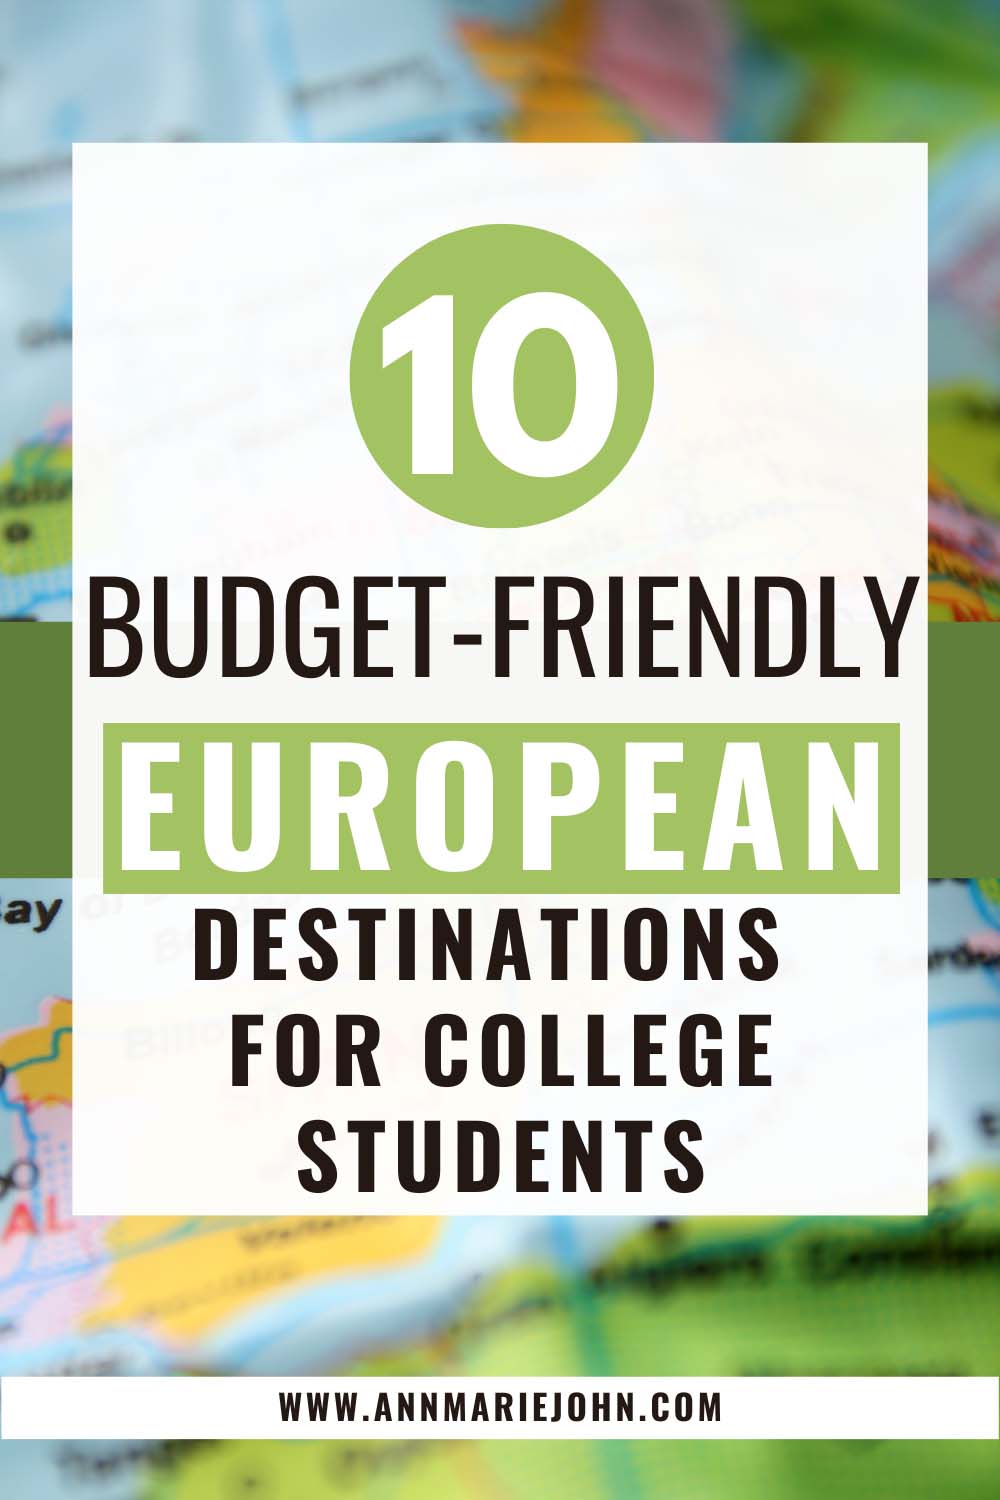 10 Budget-Friendly European Destinations for College Students